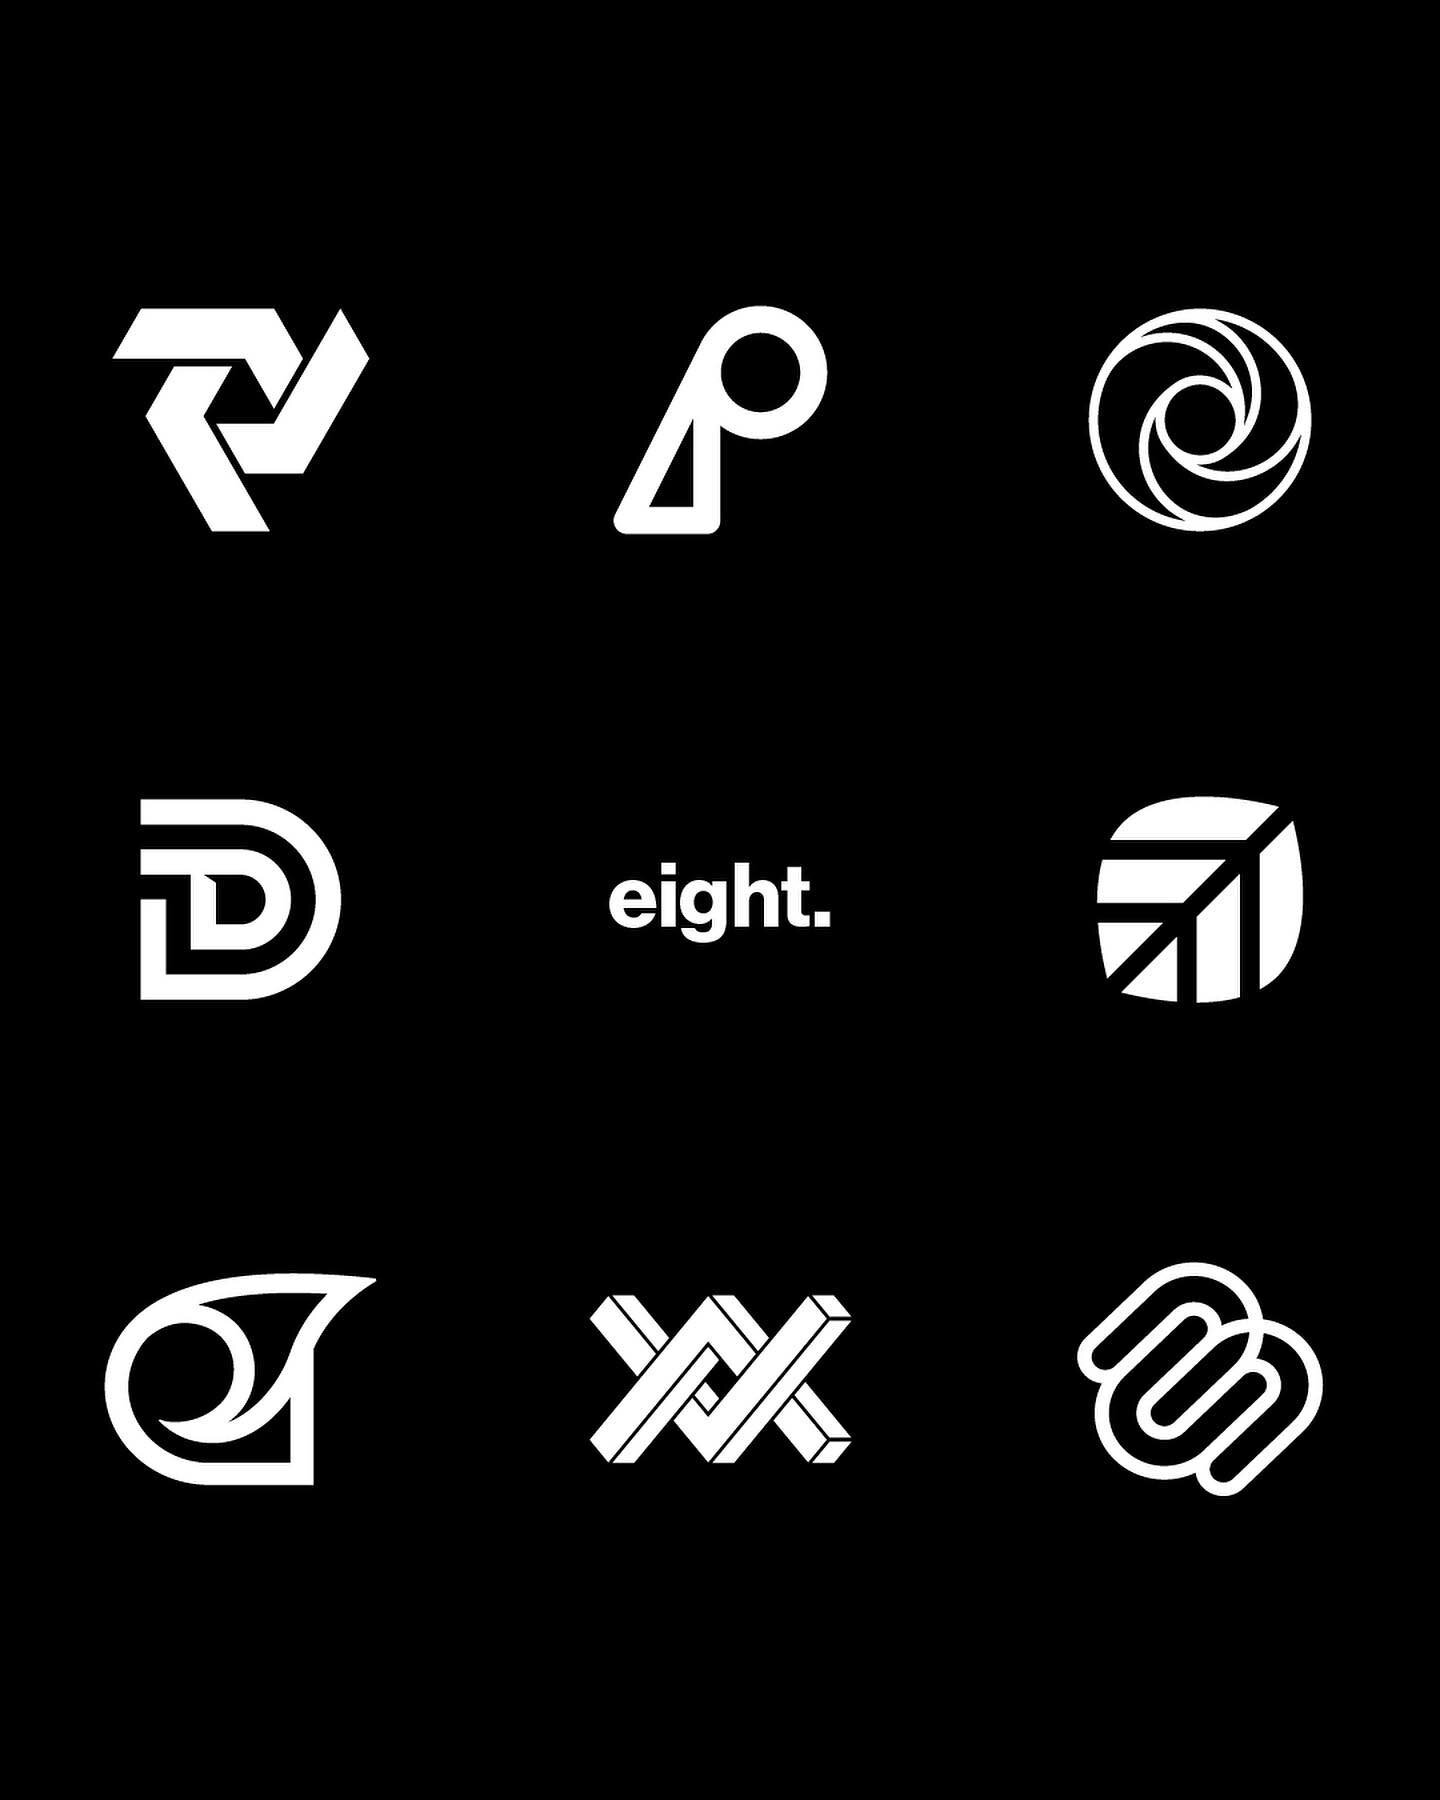 Eight more new/unseen logos for 8 years of @breathedotdesign 
In order:
@eatmovedad (which has multiple versions)
@peoplearchitectsltd 
@ensompictureco 
@thumbdesigns 
@justmoneymvt 
Myna (Unused)
Boxx Construction (Unpaid)
The Coaching Matrix (Retir